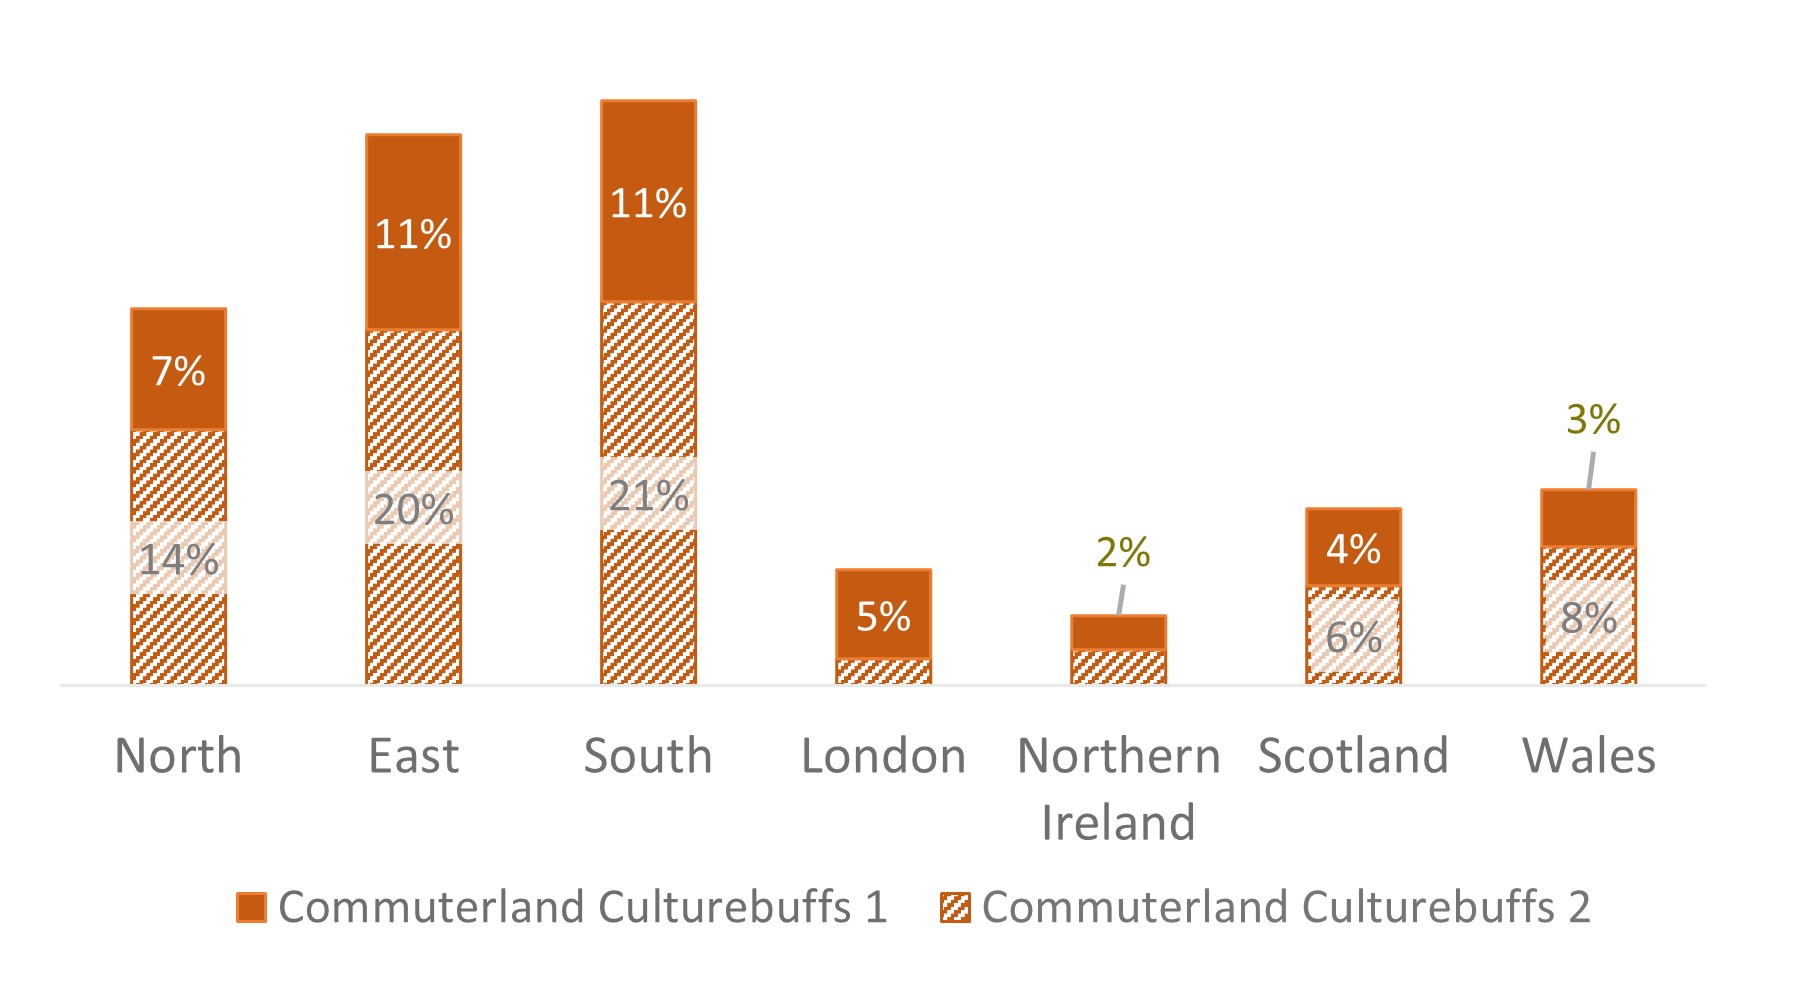 A stacked bar chart shows the two subegments split by region. Subsegment 2 makes up around two thirds of the segment across most regions, but London is higher for subsegment 1